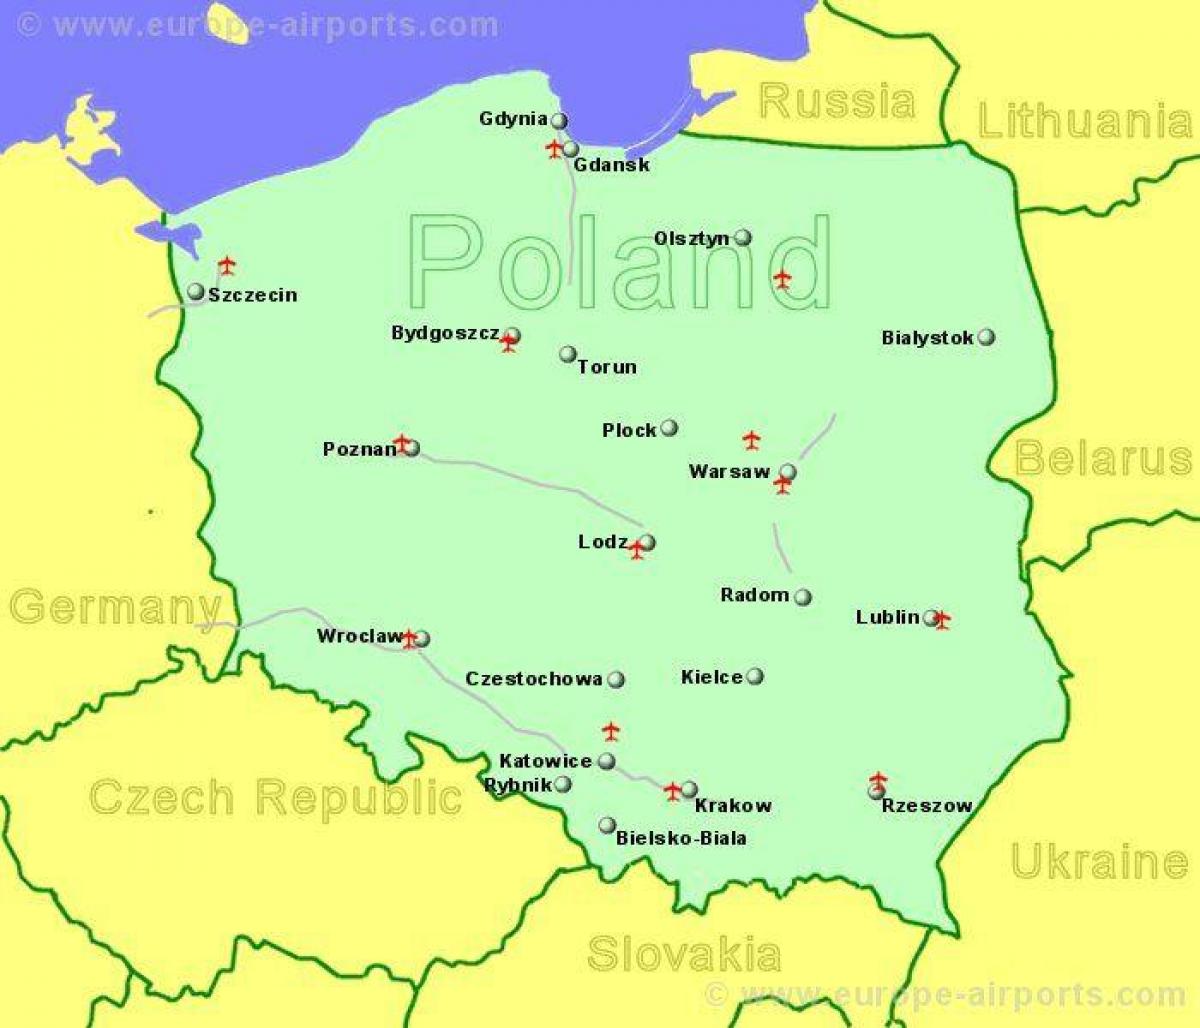 map of Poland showing airports